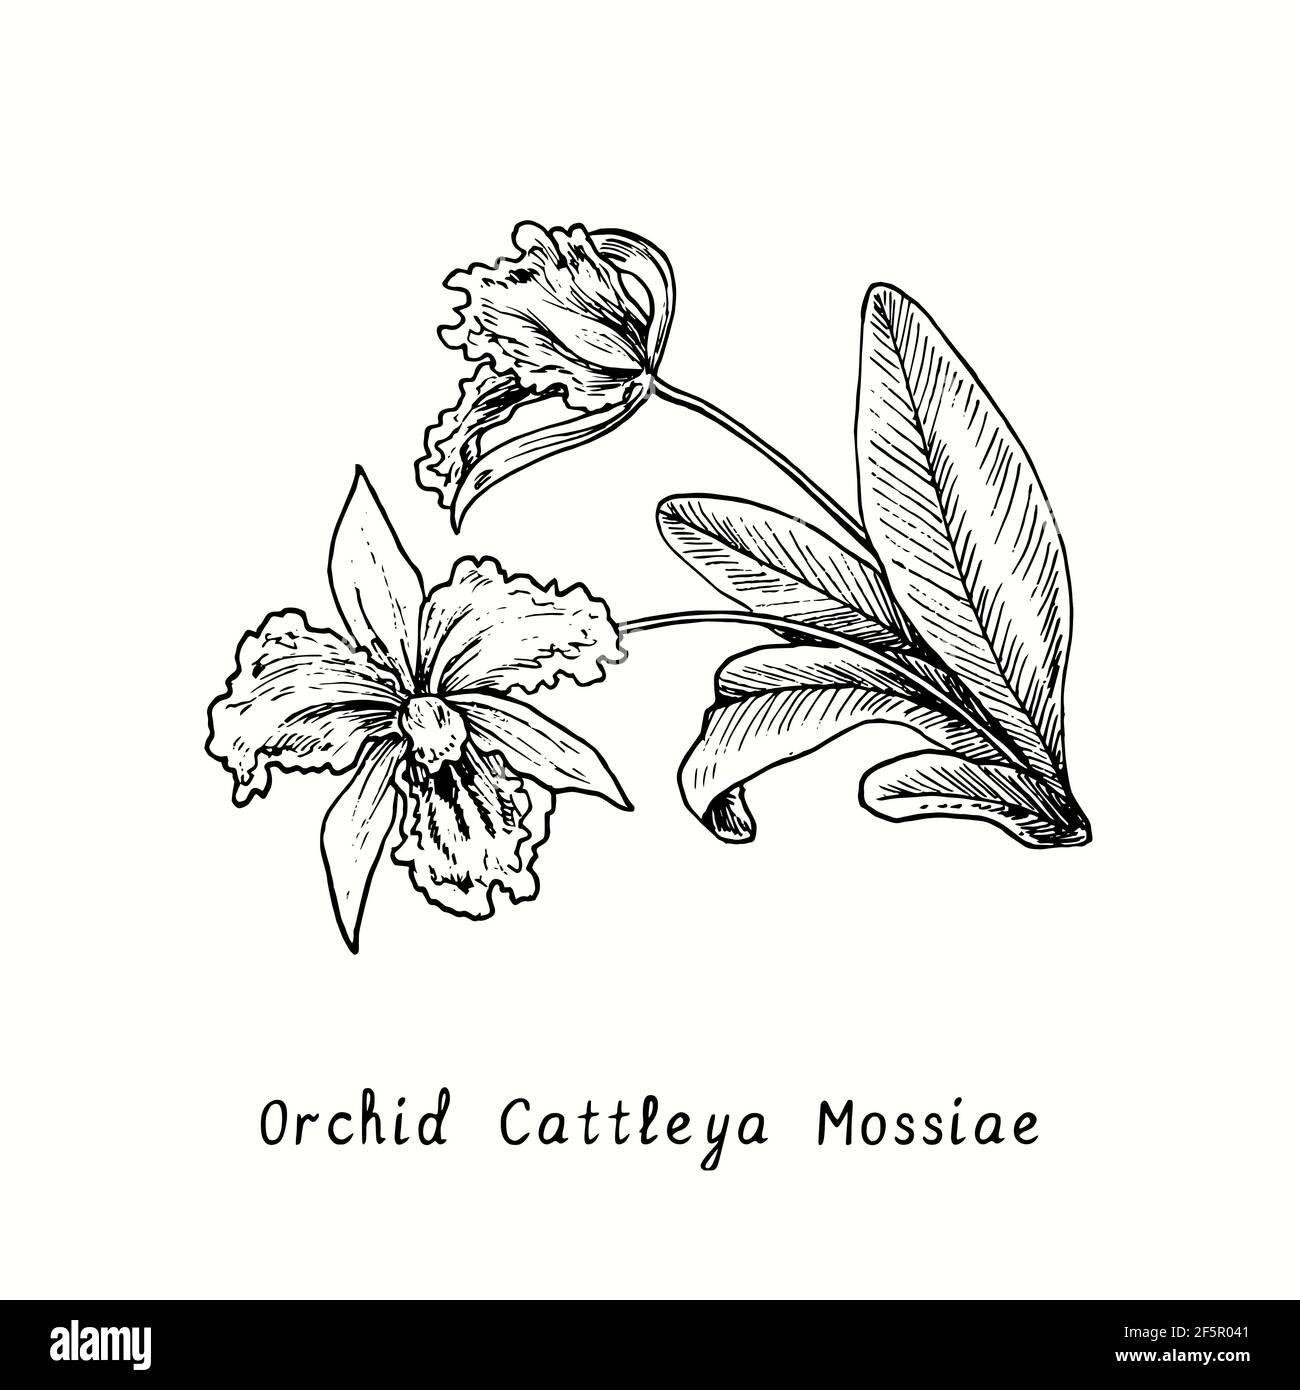 Orchid Cattleya Mossiae flowers on stem with leaves. Ink black and white doodle drawing in woodcut style. Stock Photo